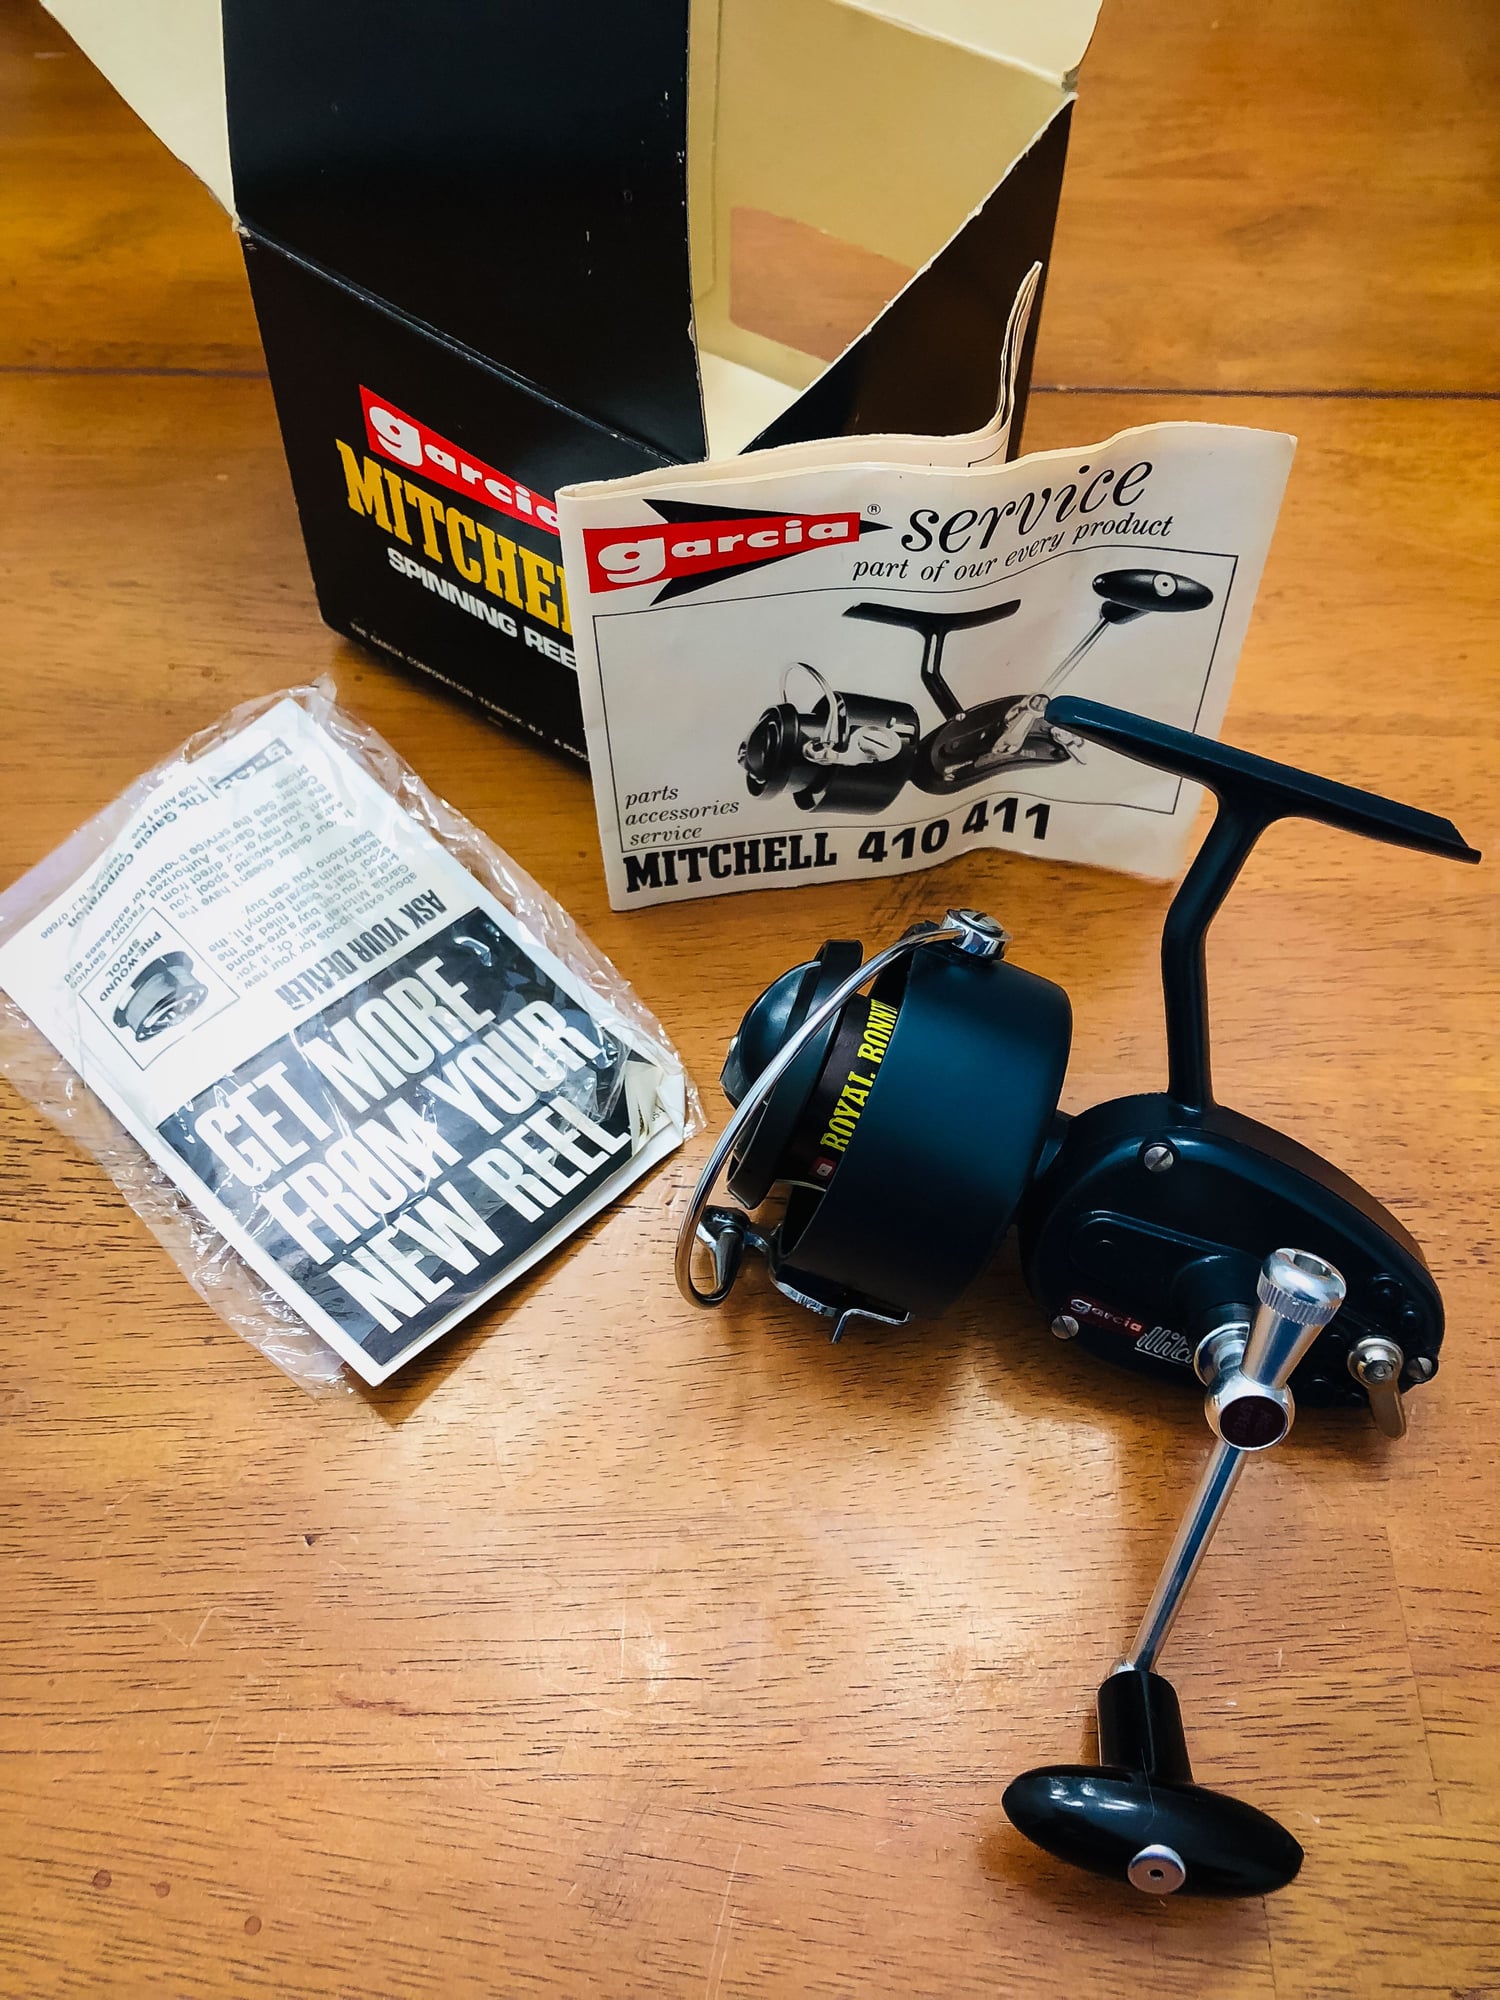 SOLD NIB Vintage Mitchell 410 Spinning Reel - The Hull Truth